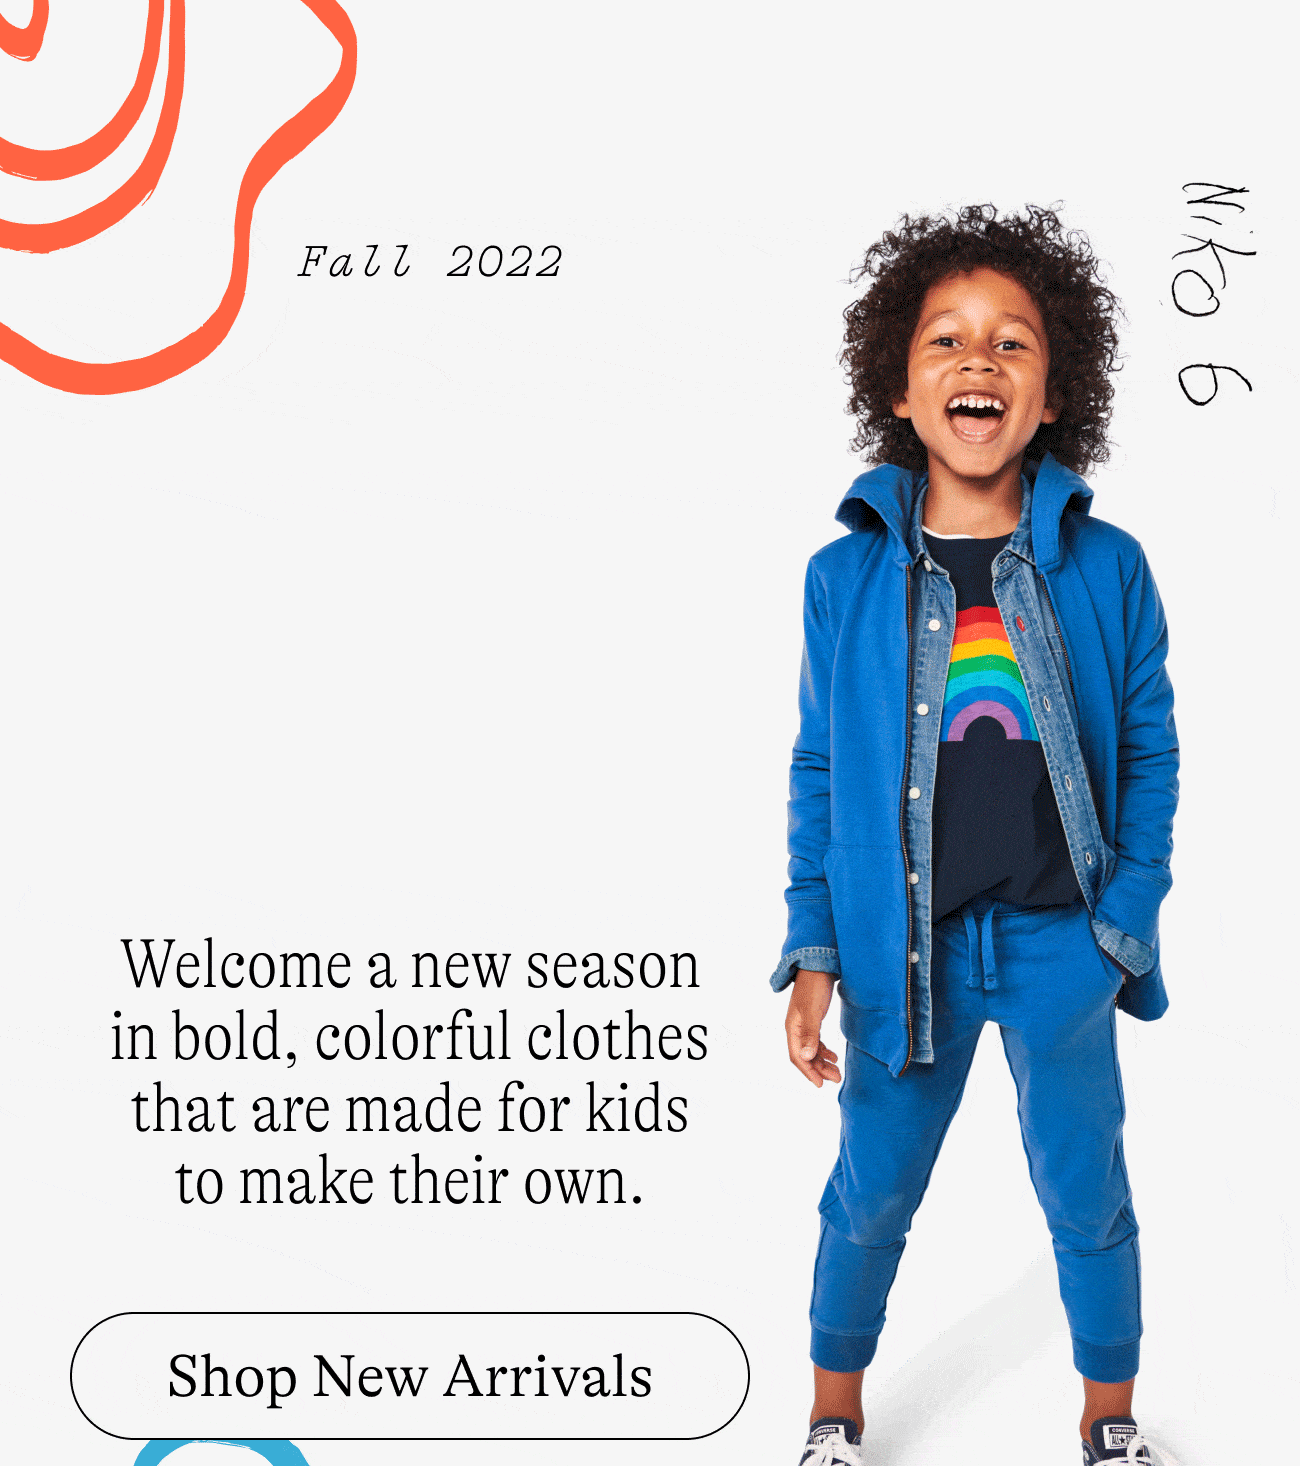 Fall 2022: The Future Is Bright. Welcome a new season in bold, colorful clothes that are made for kids to make their own. Shop new arrivals